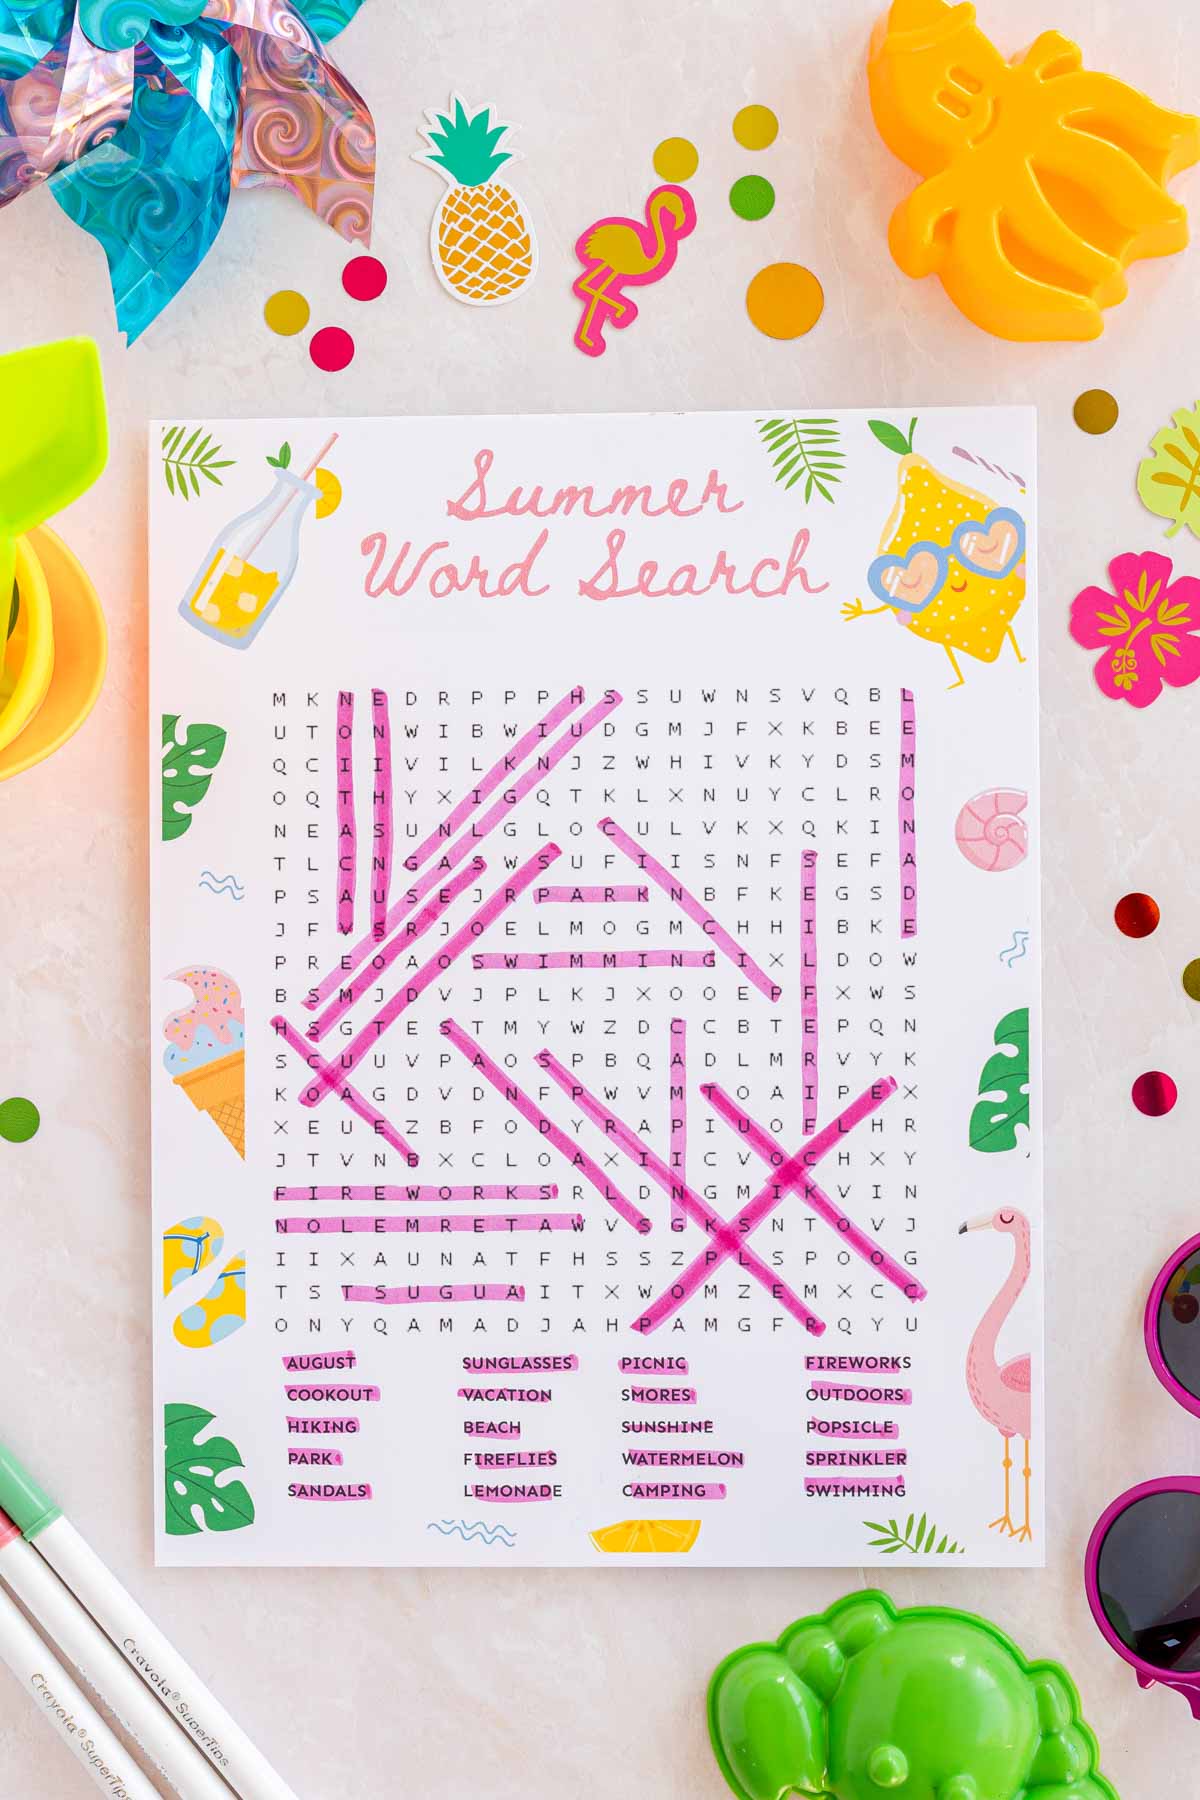 summer word search with words higlighted